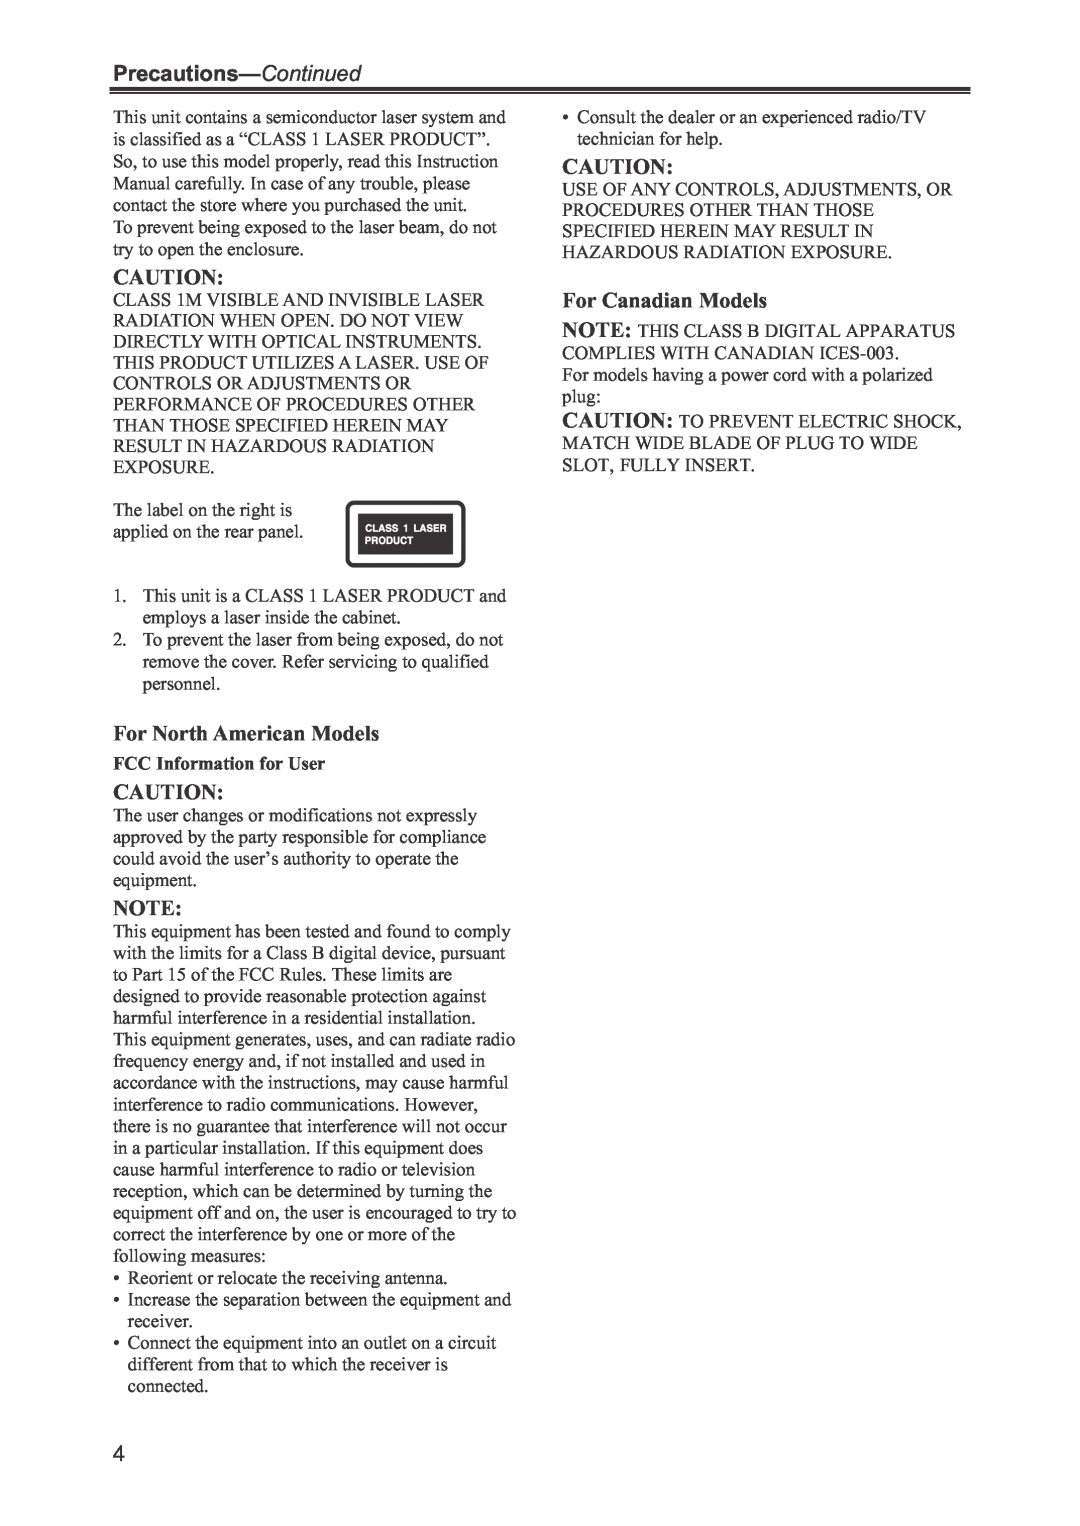 Onkyo CR-445 Precautions-Continued, FCC Information for User, For North American Models, For Canadian Models 